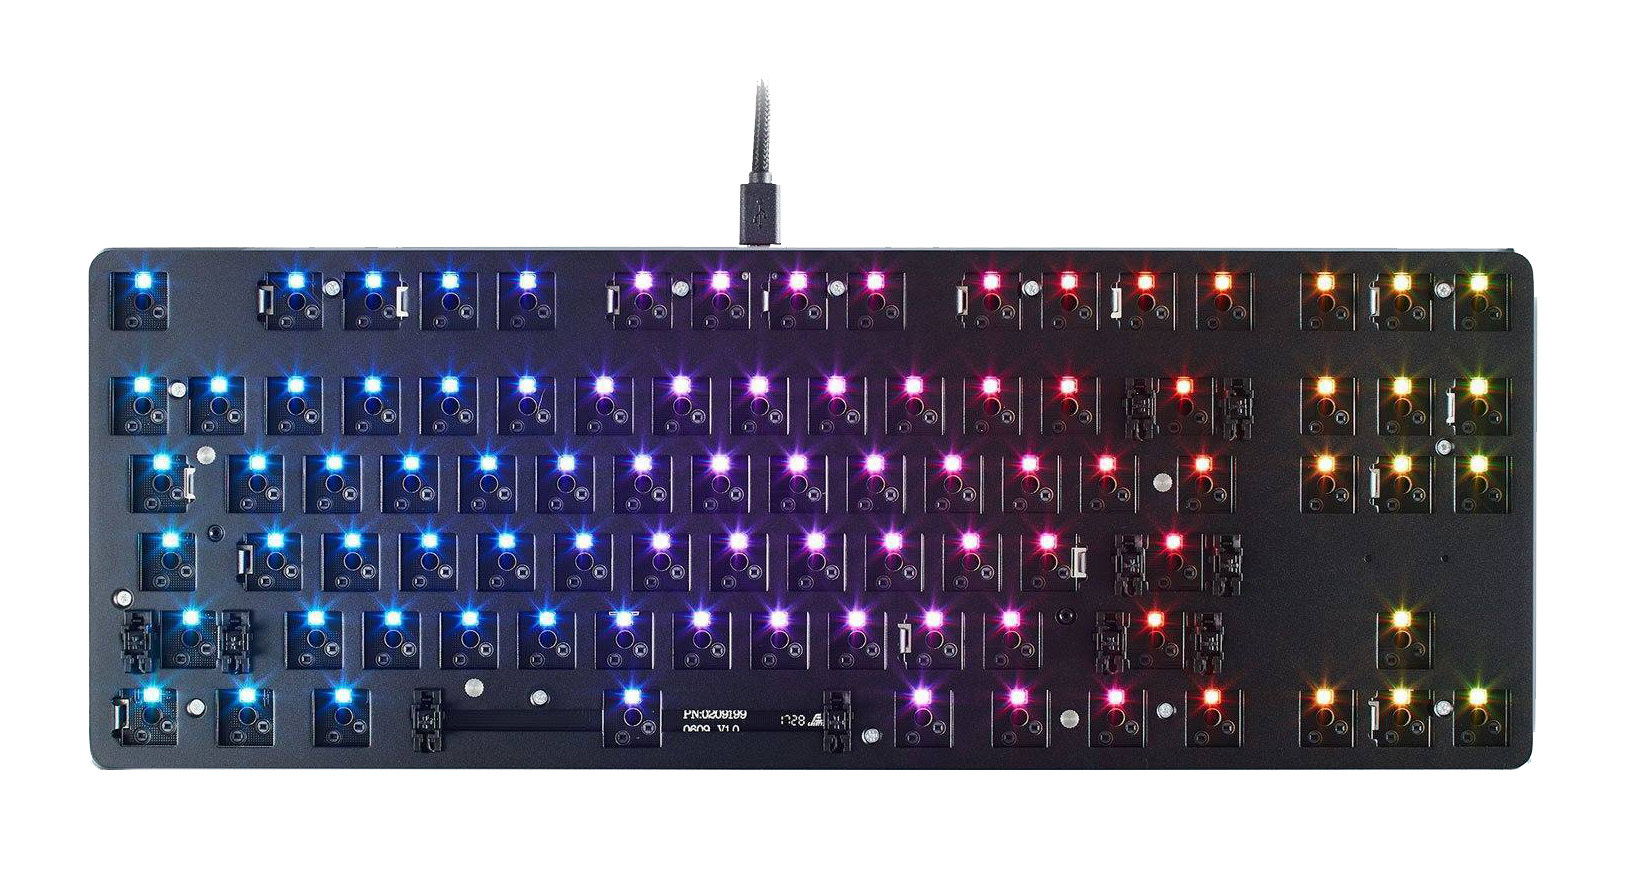 Glorious PC Gaming Race The Glorious GMMK-TKL